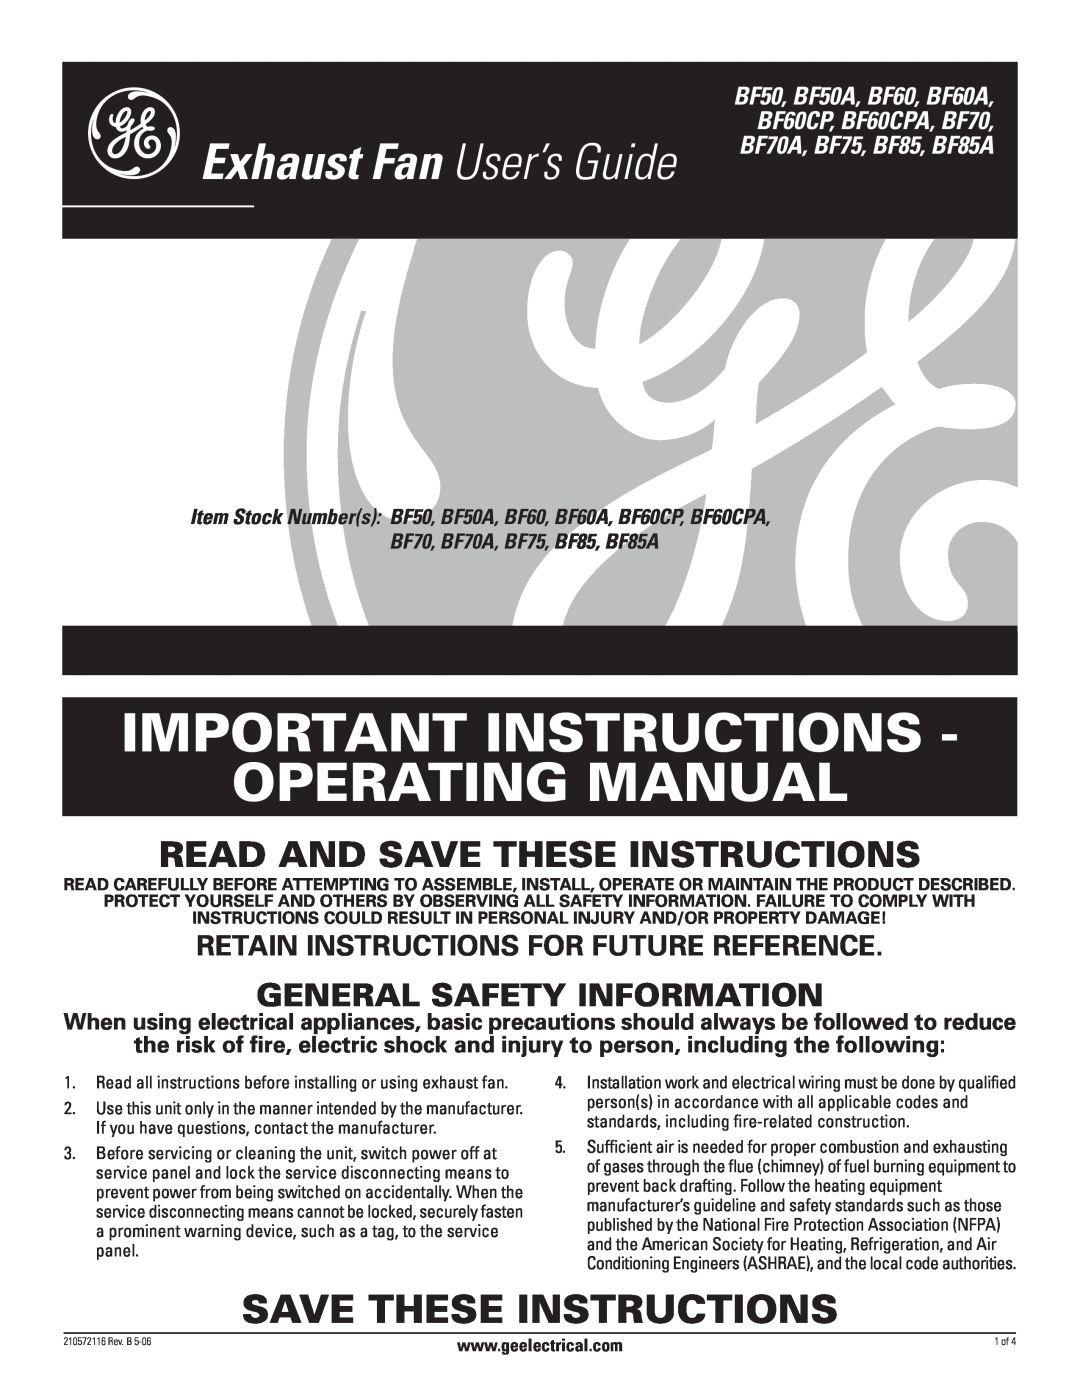 GE BF70 manual Retain Instructions For Future Reference, Important Instructions Operating Manual, Save These Instructions 